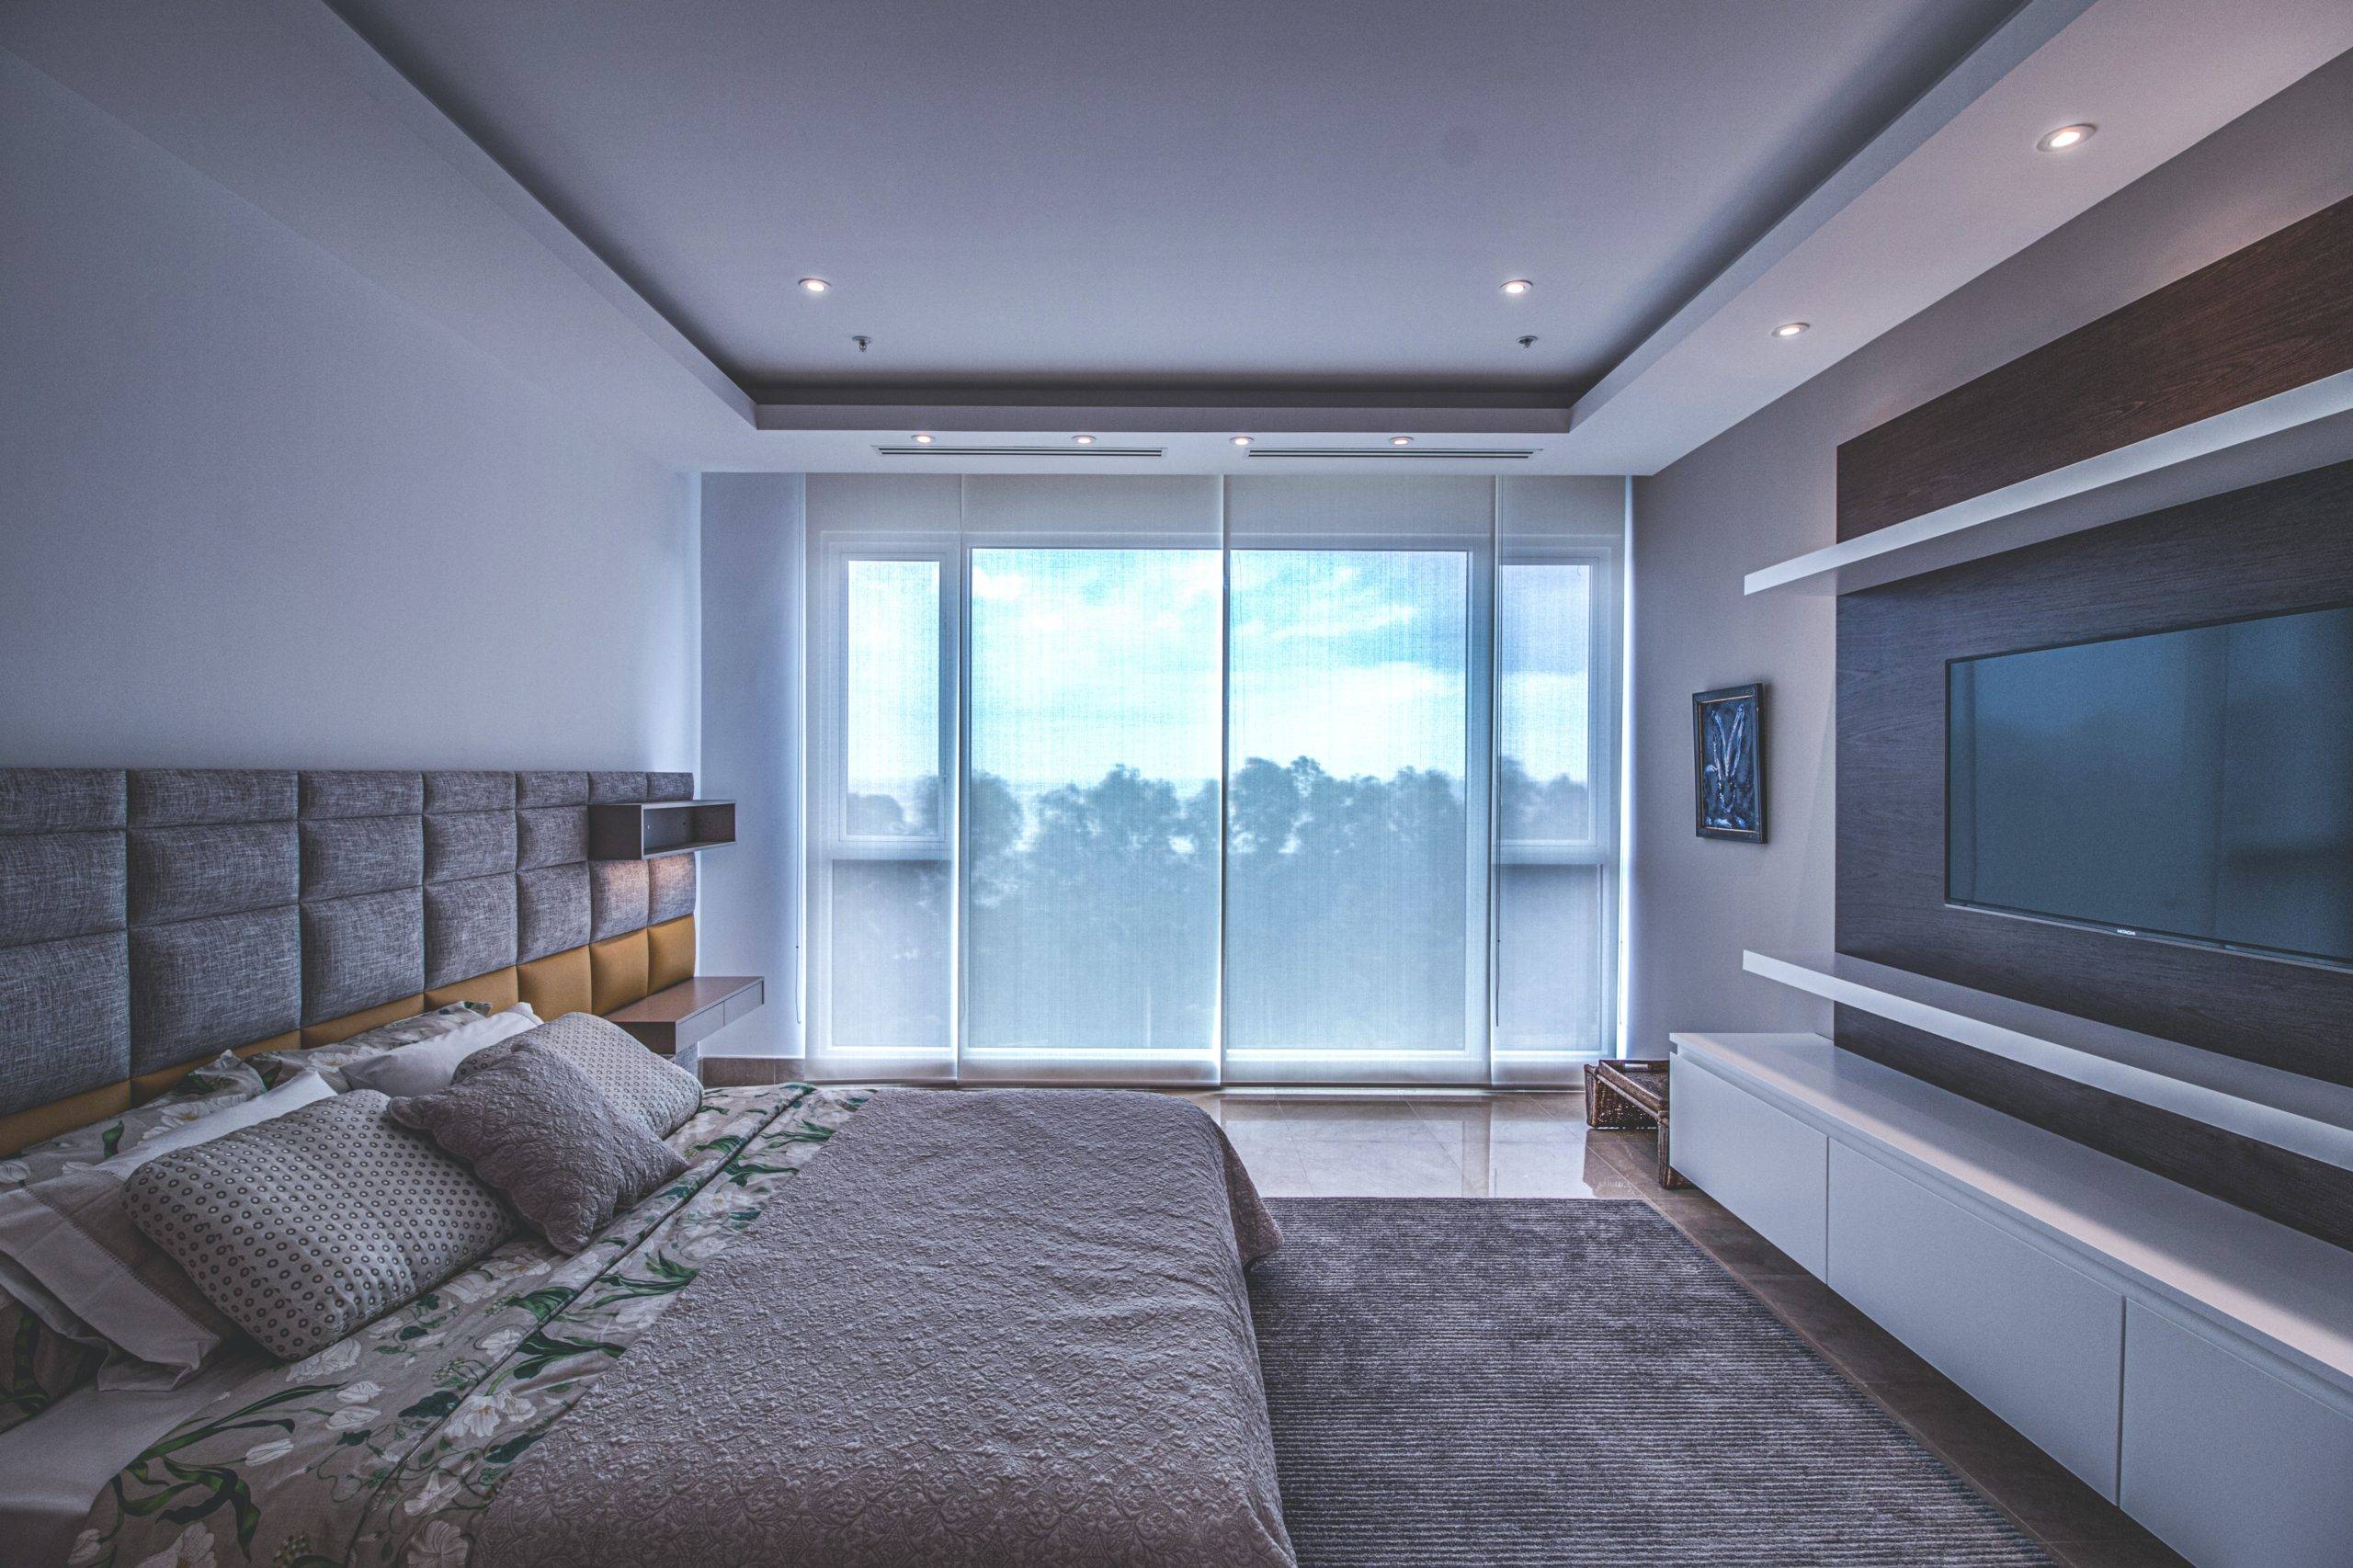 Bedroom with large windows